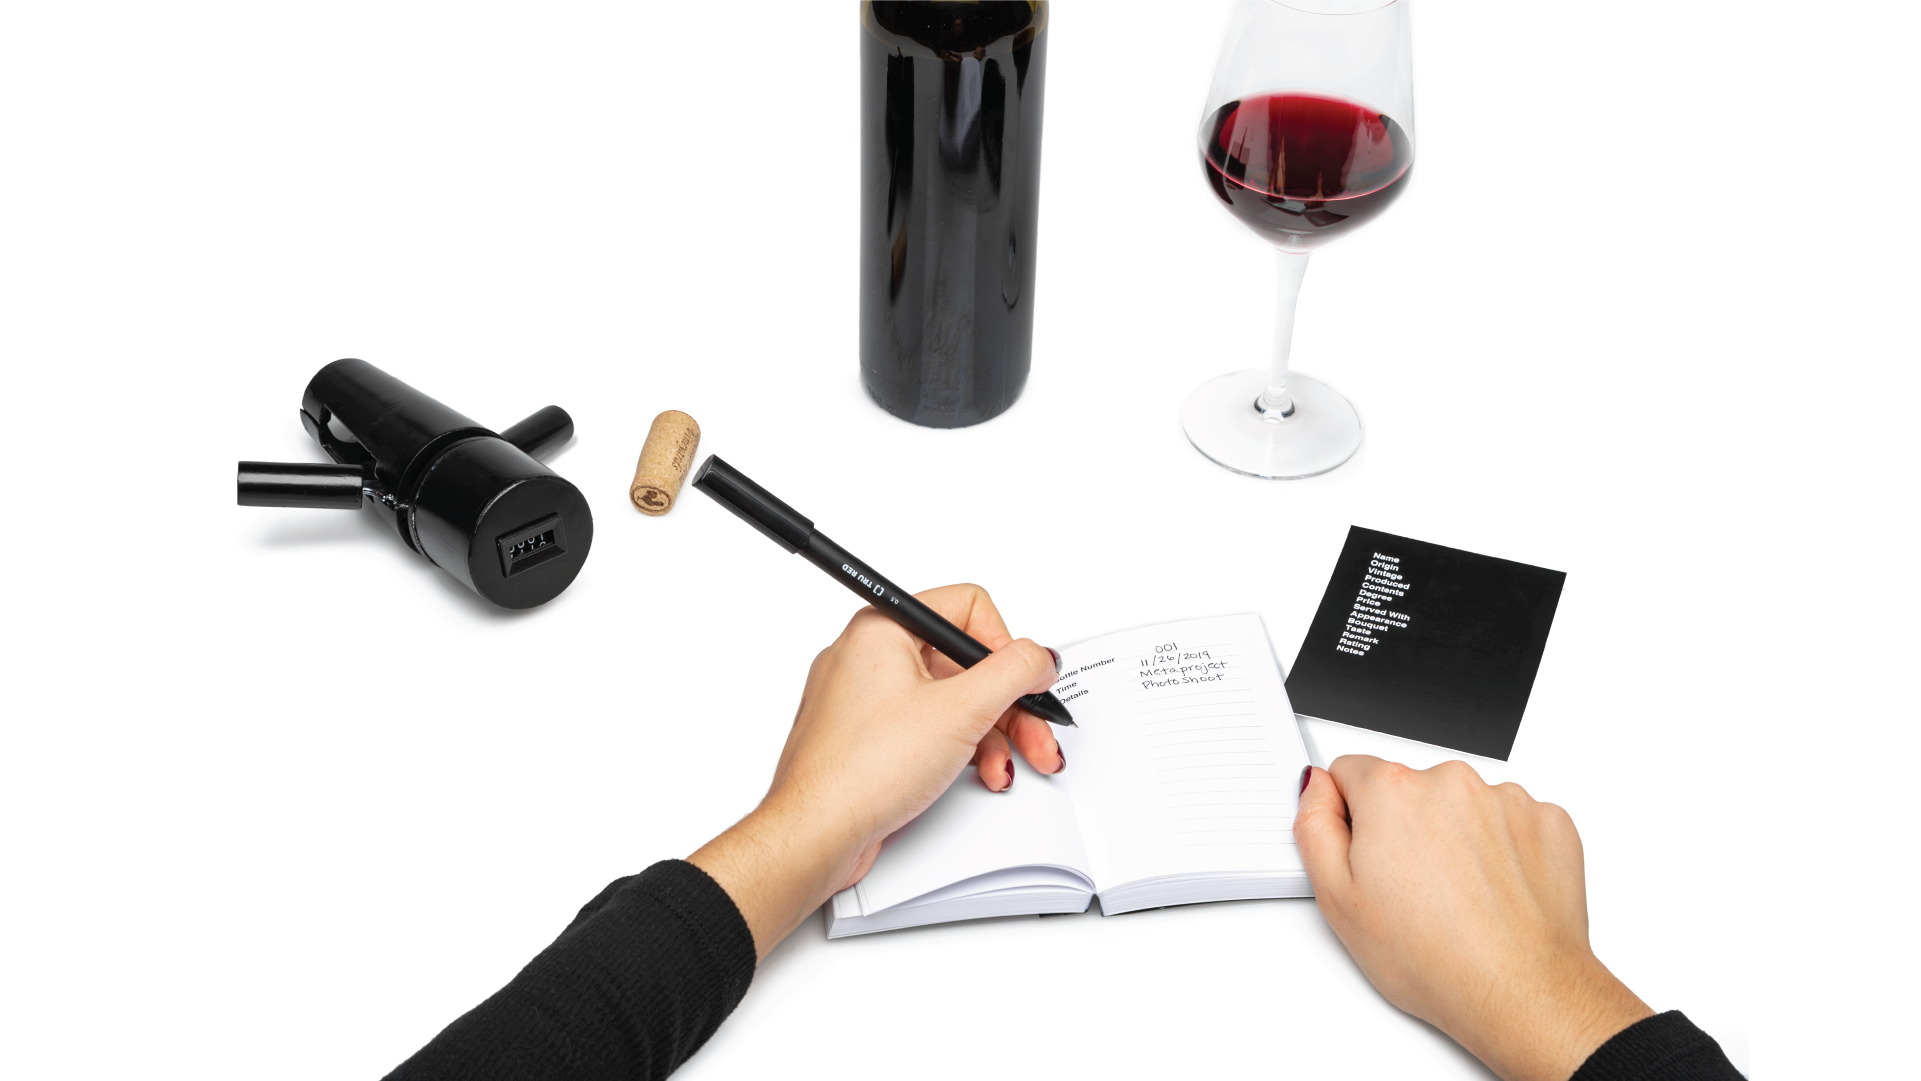 Hands writing on the accompanying journal with the corkscrew on the left, and a bottle and glass of wine on the right.